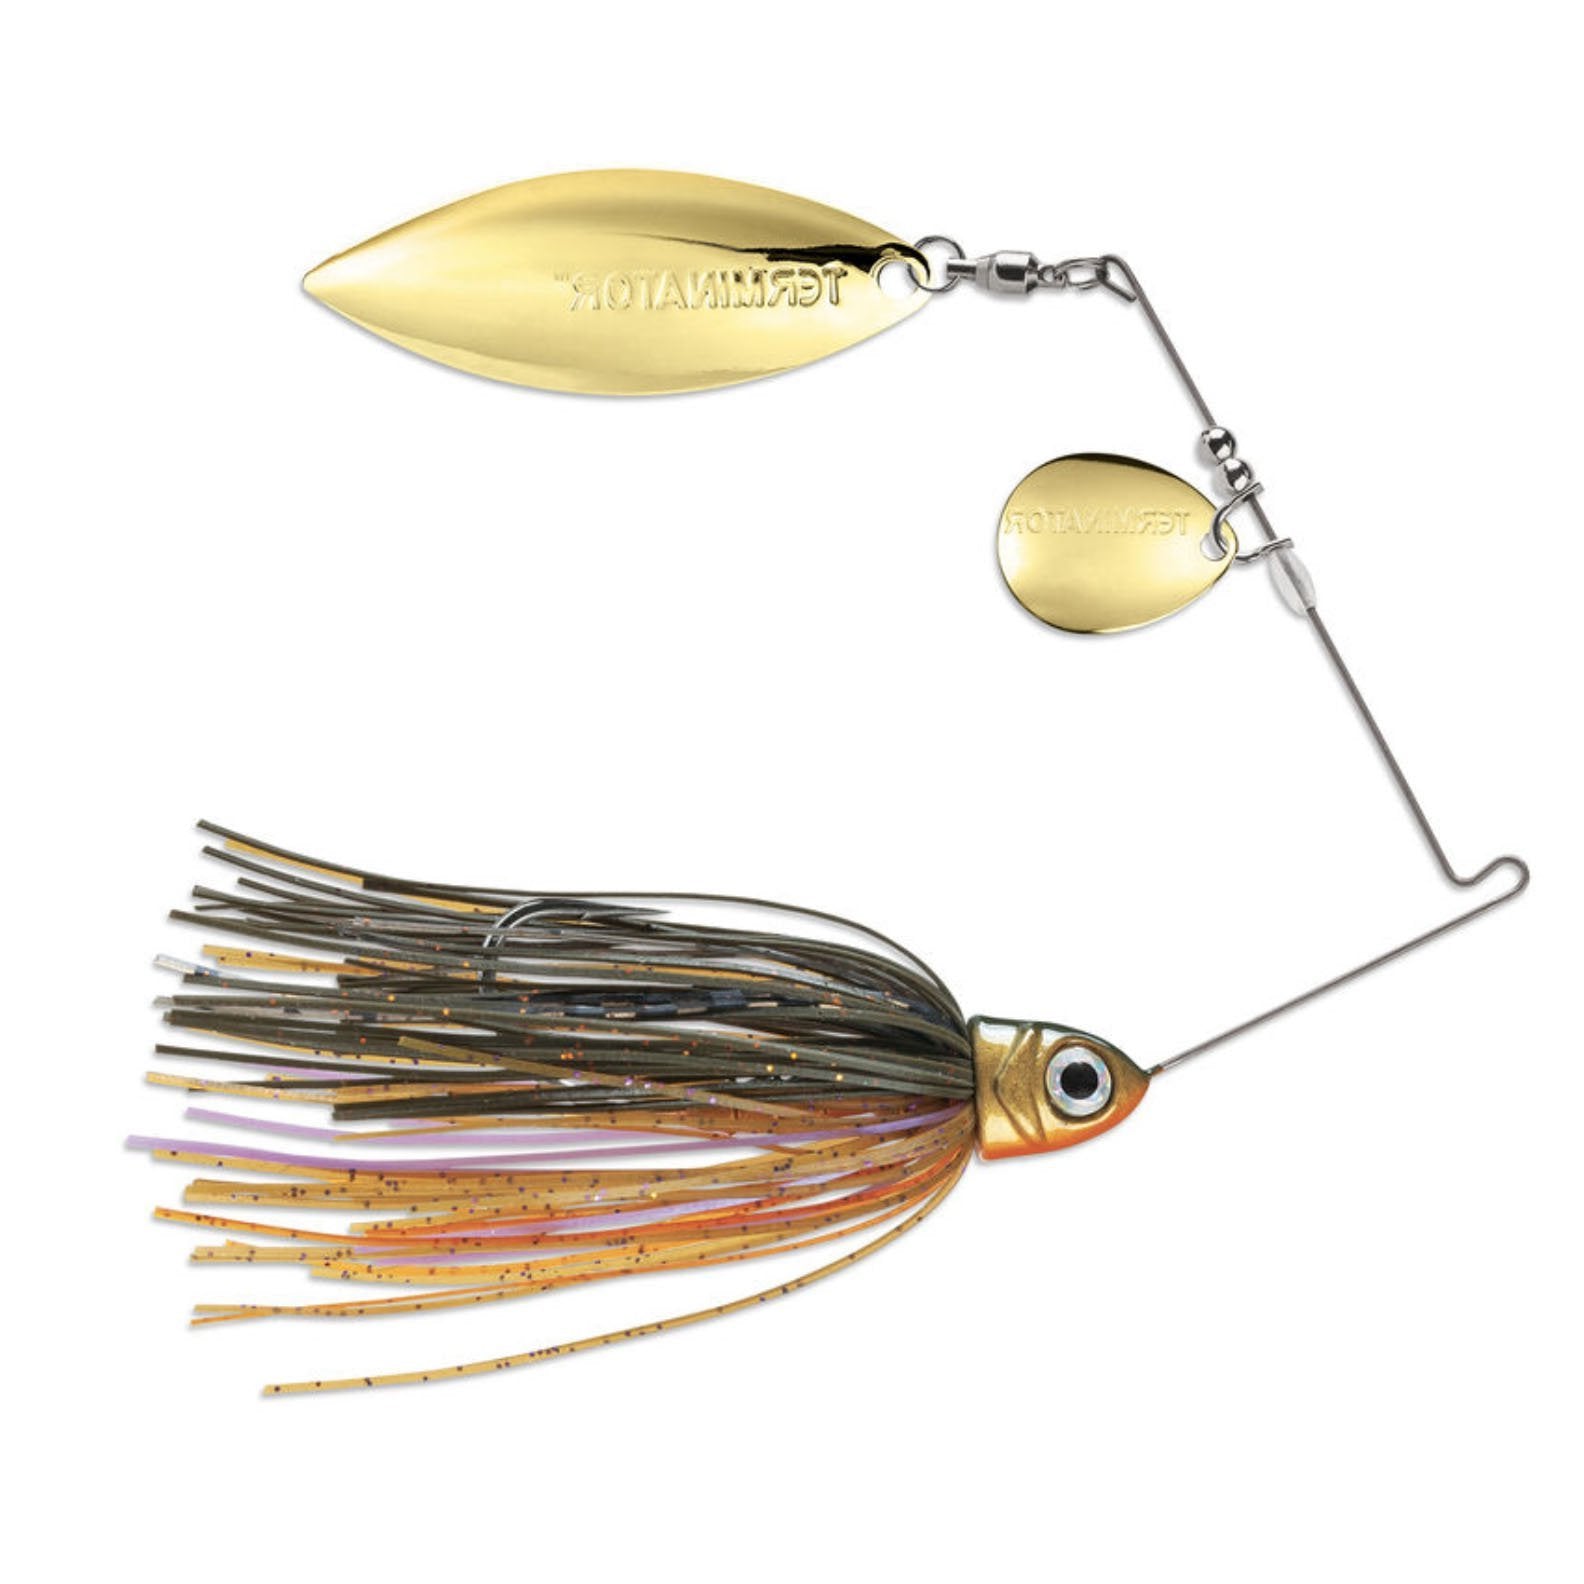 Terminator Hot Tip Chartreuse Super Stainless Spinnerbait .25